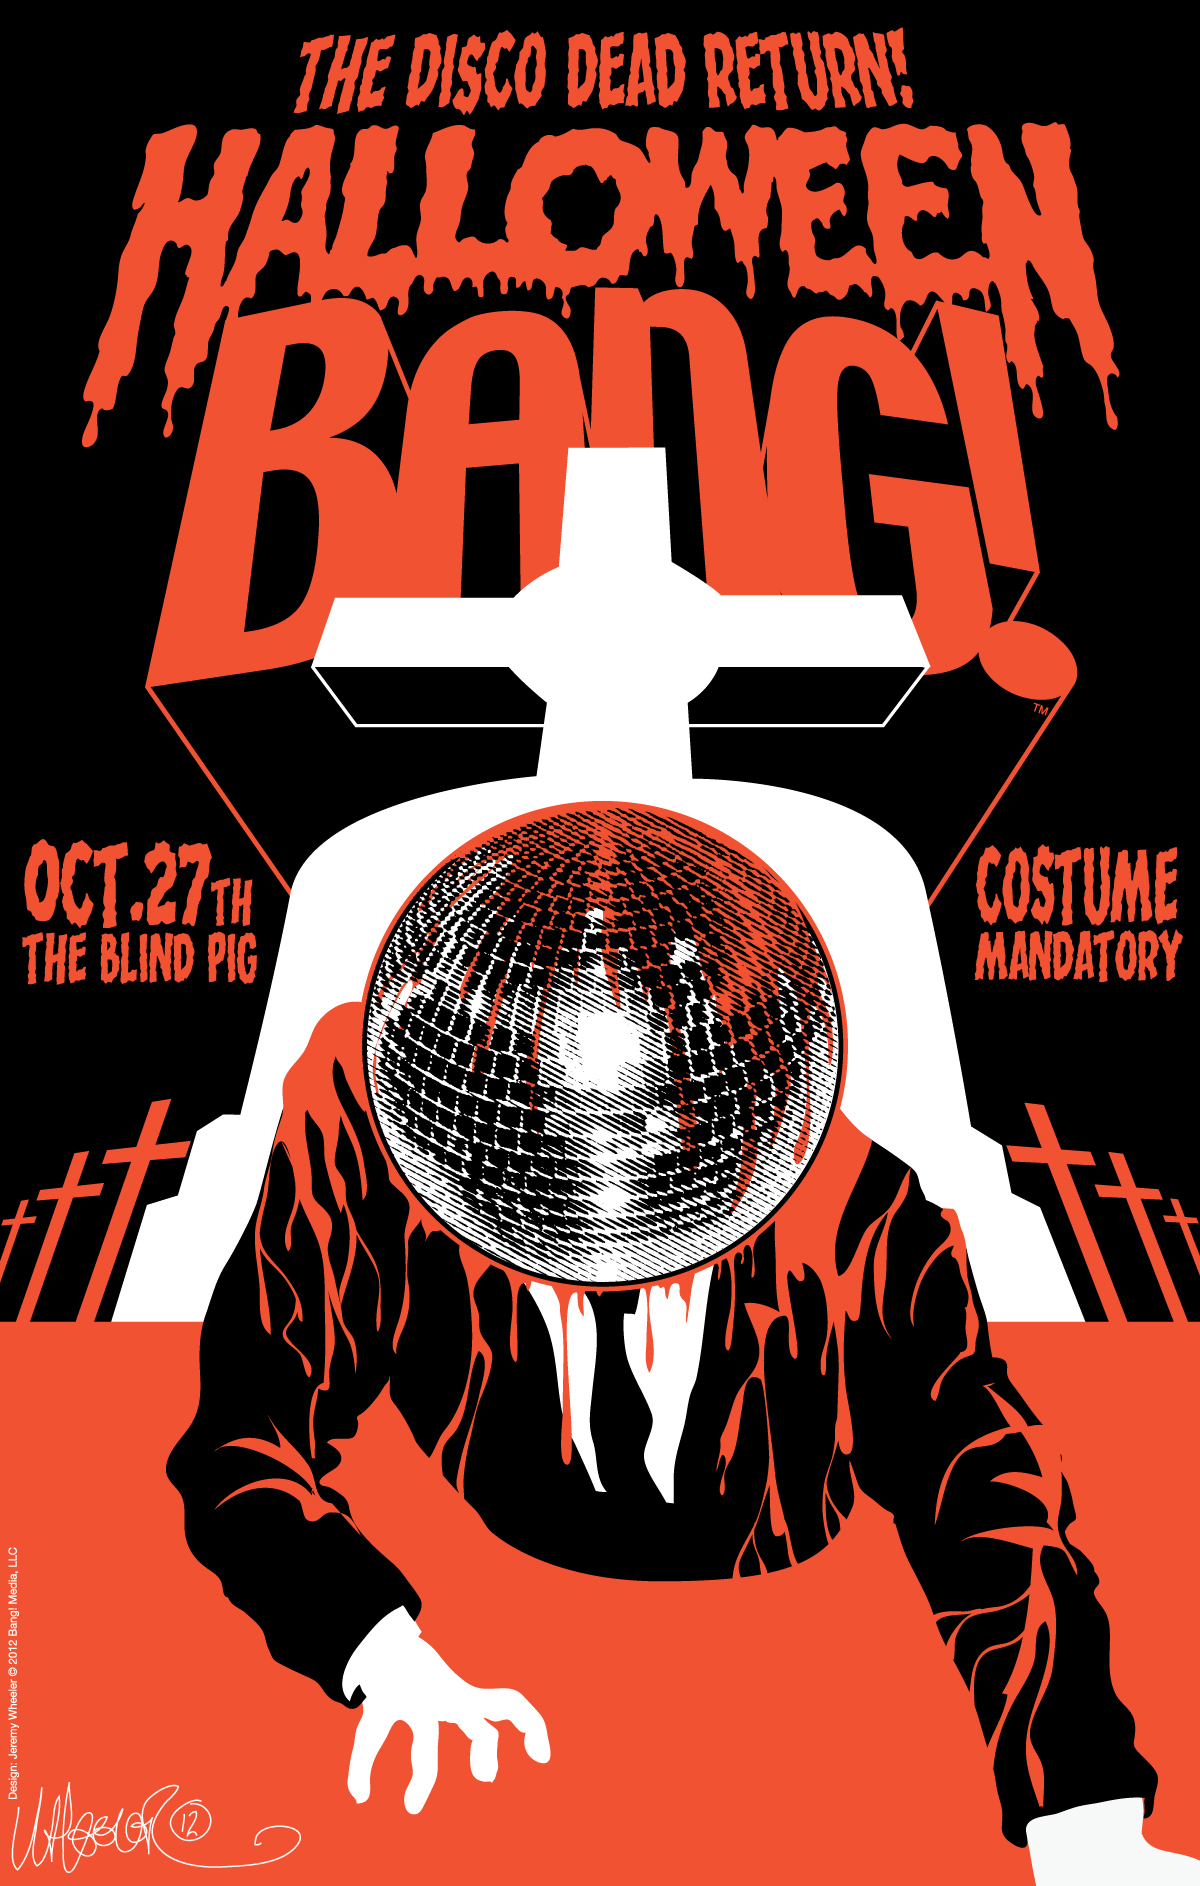 The Bang! dance party GigPoster gigposters body of work